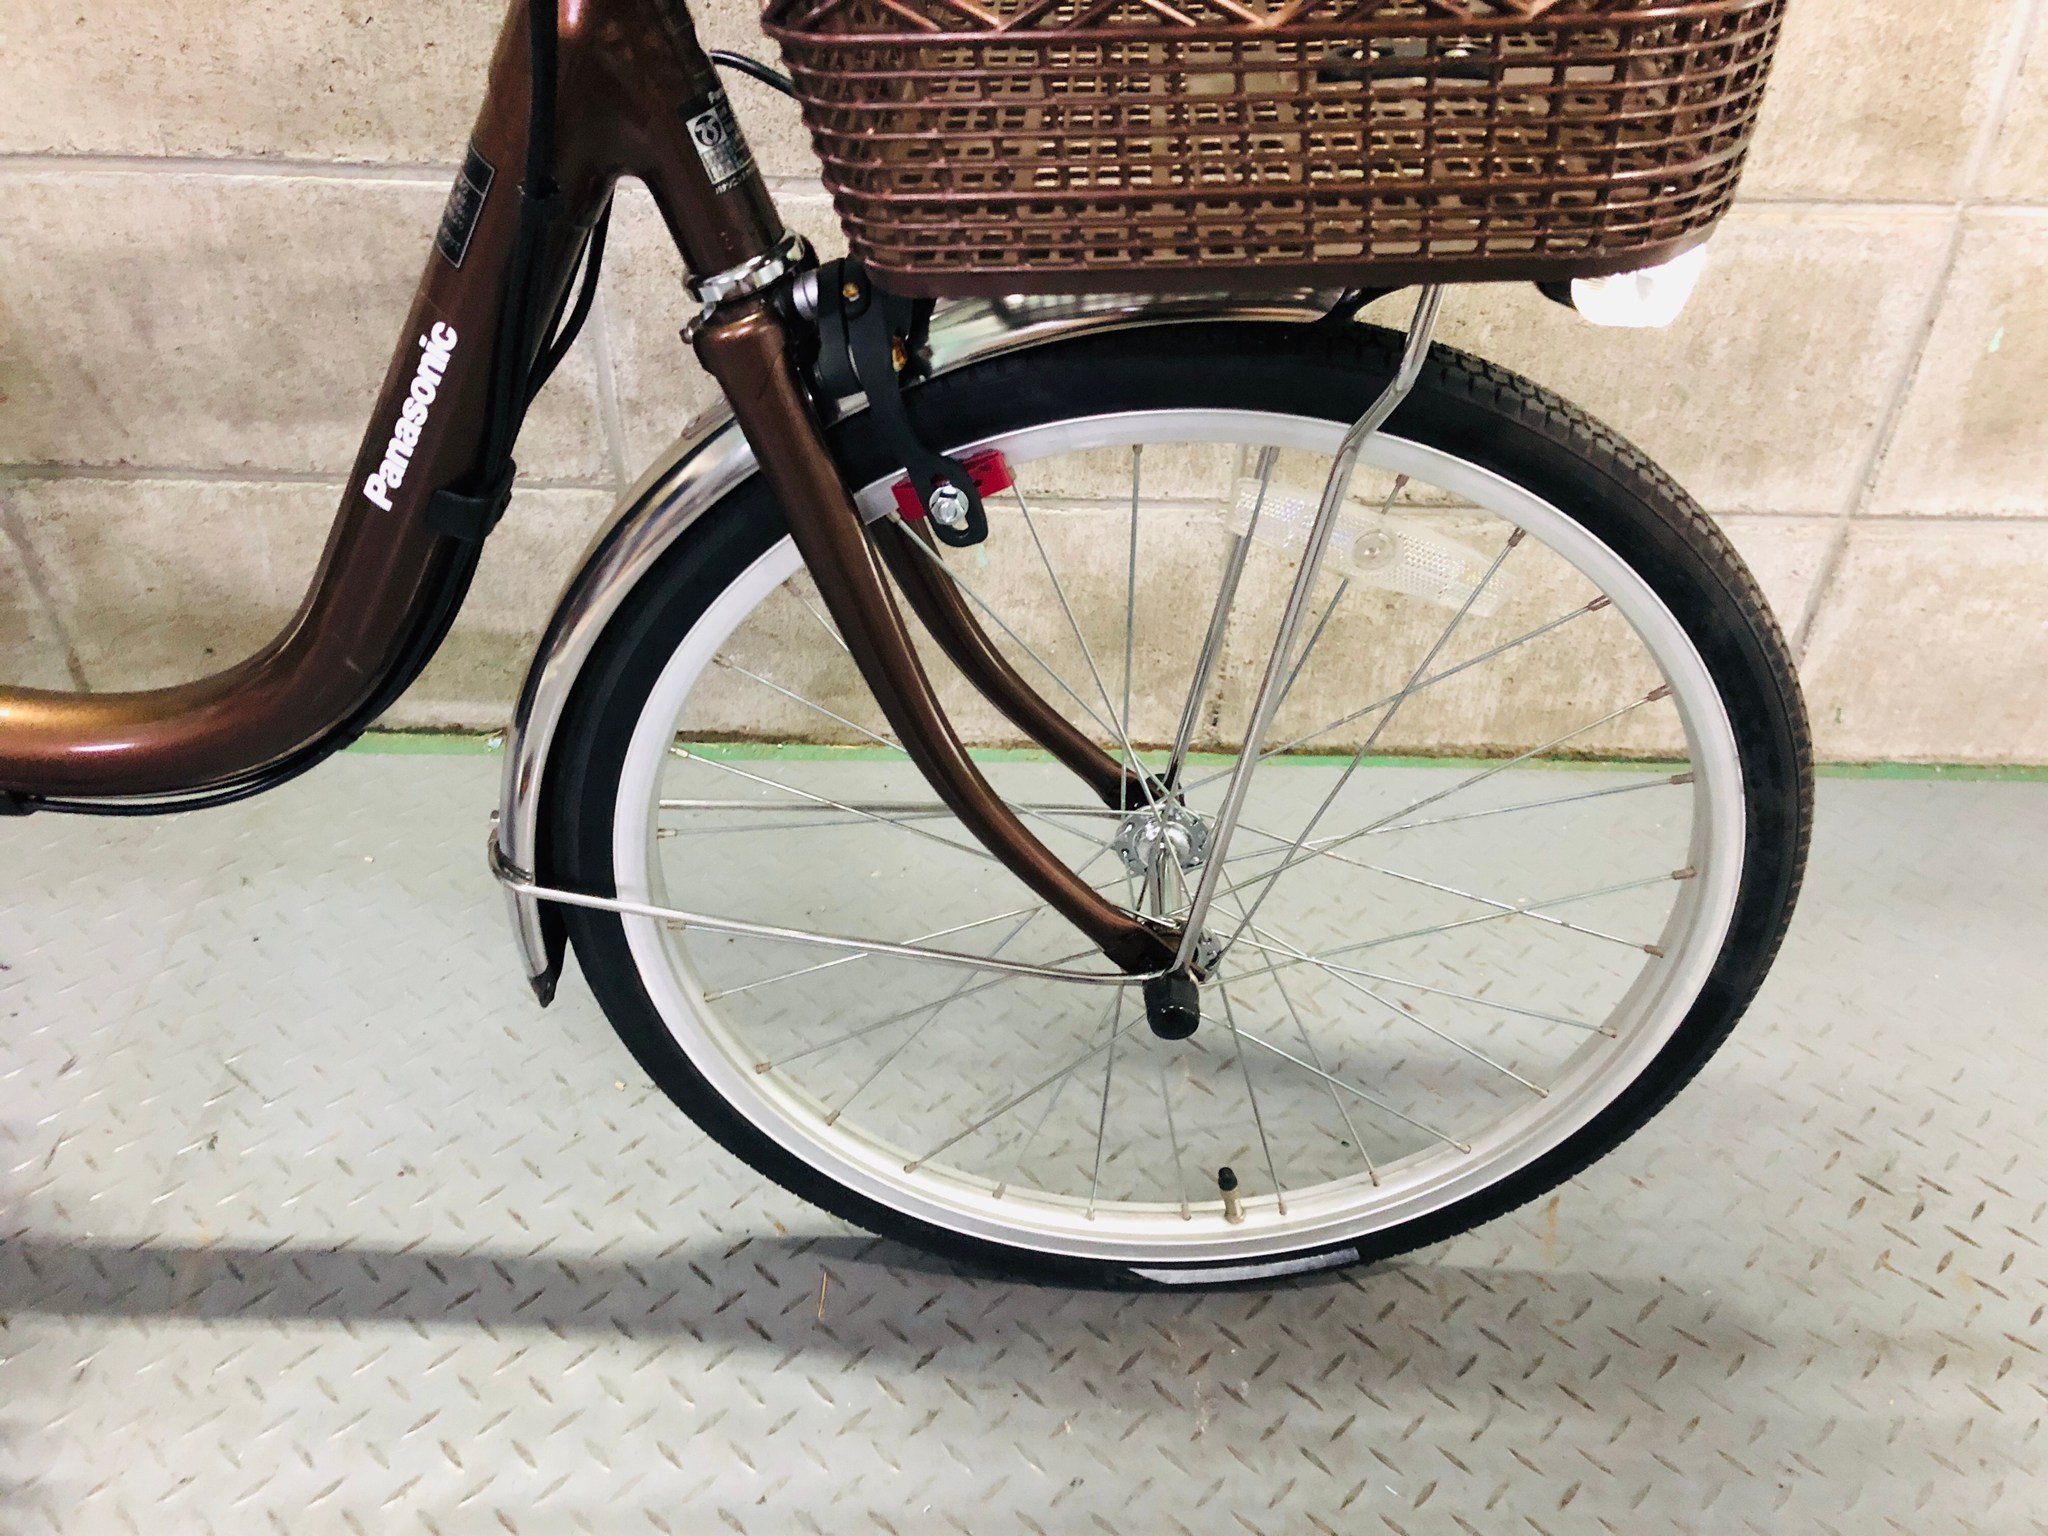 【SOLD OUT】電動自転車 パナソニック VIVI SS 20インチ 3.1Ah 茶色 | 国産・中古の激安電動アシスト自転車を販売